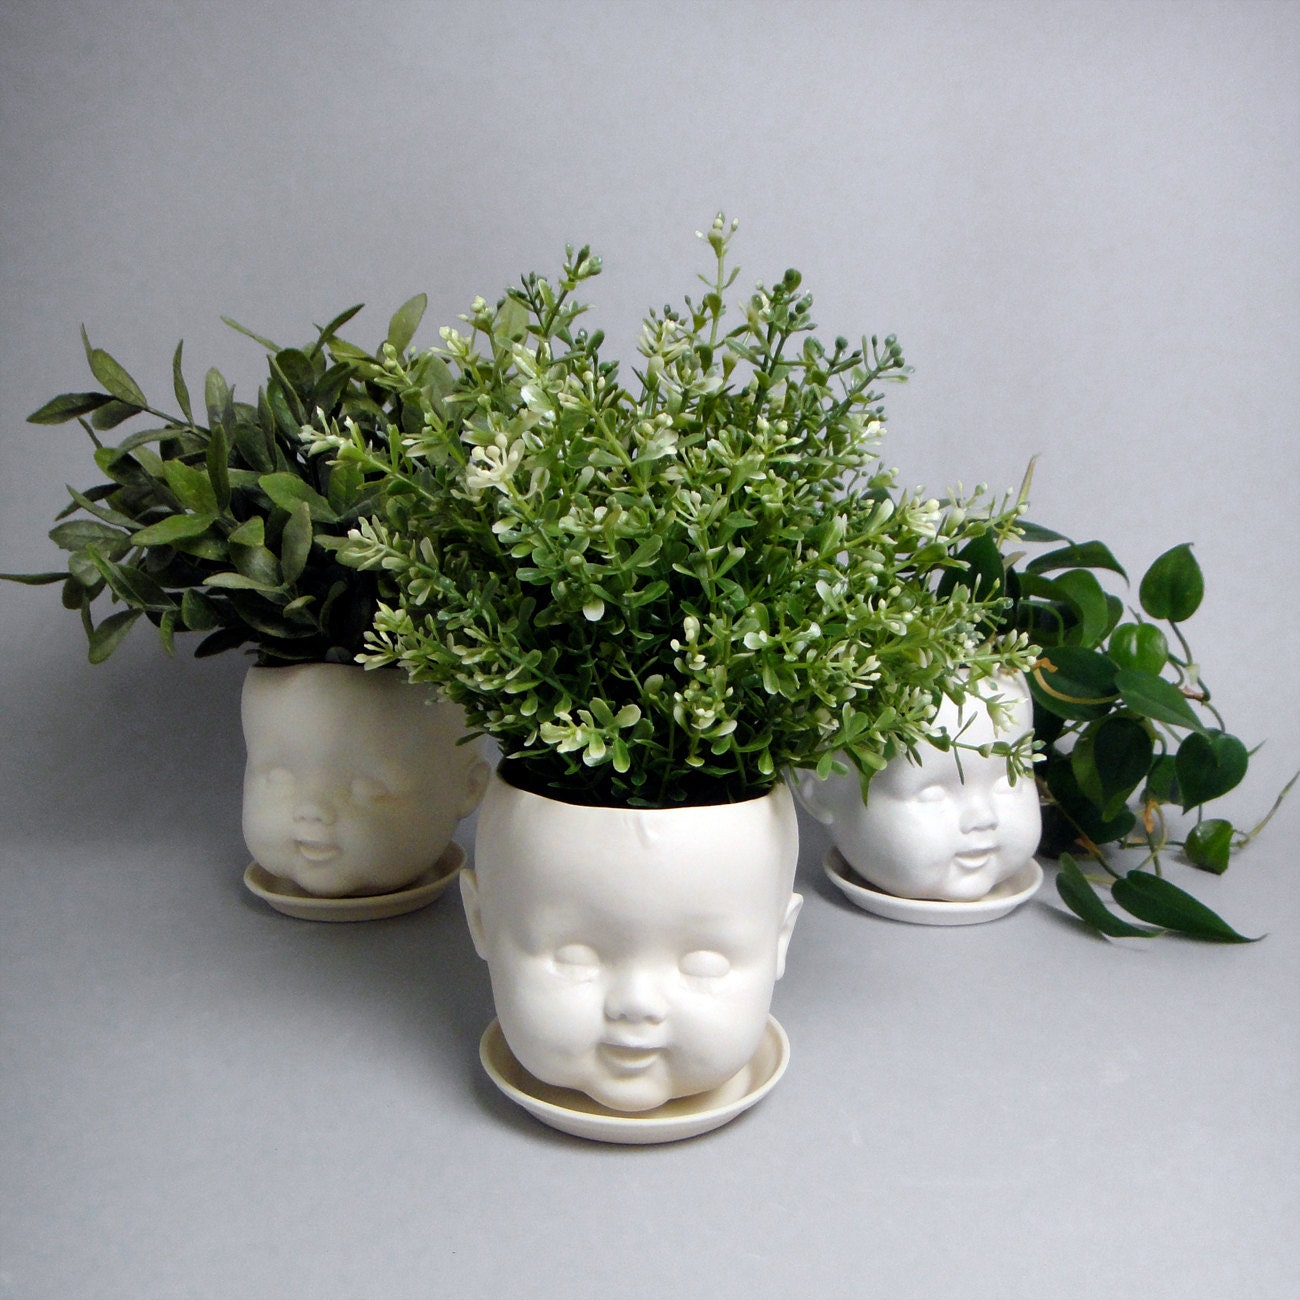 Porcelain Baby doll head planter /or candy dish - reshapestudio